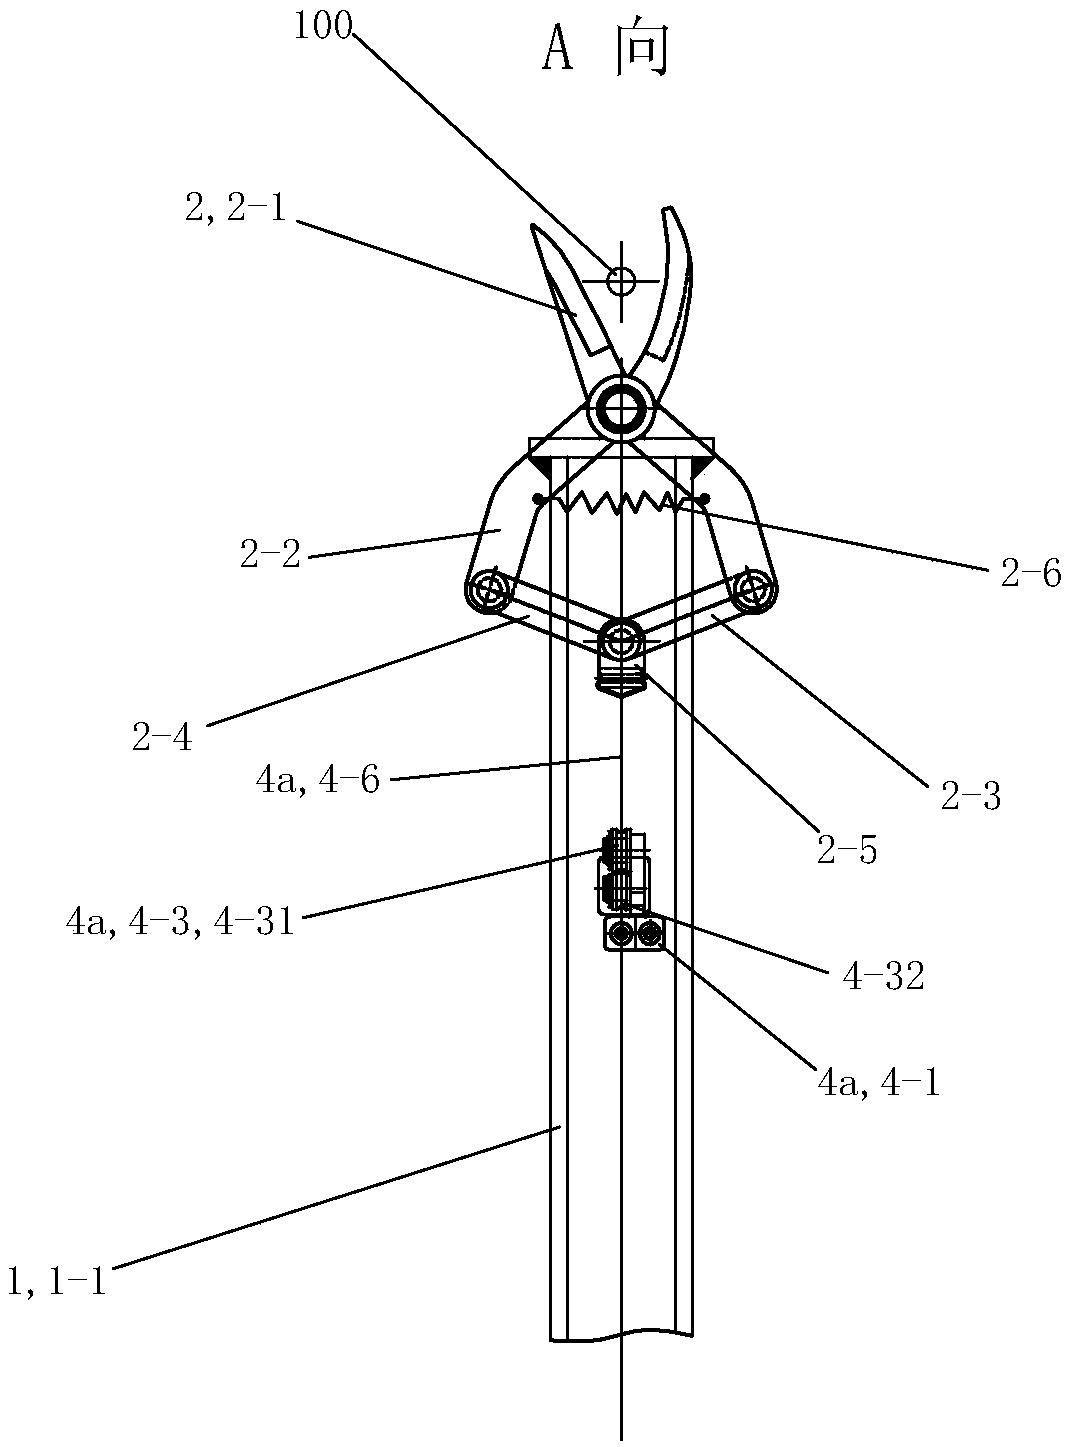 High-altitude pruning device